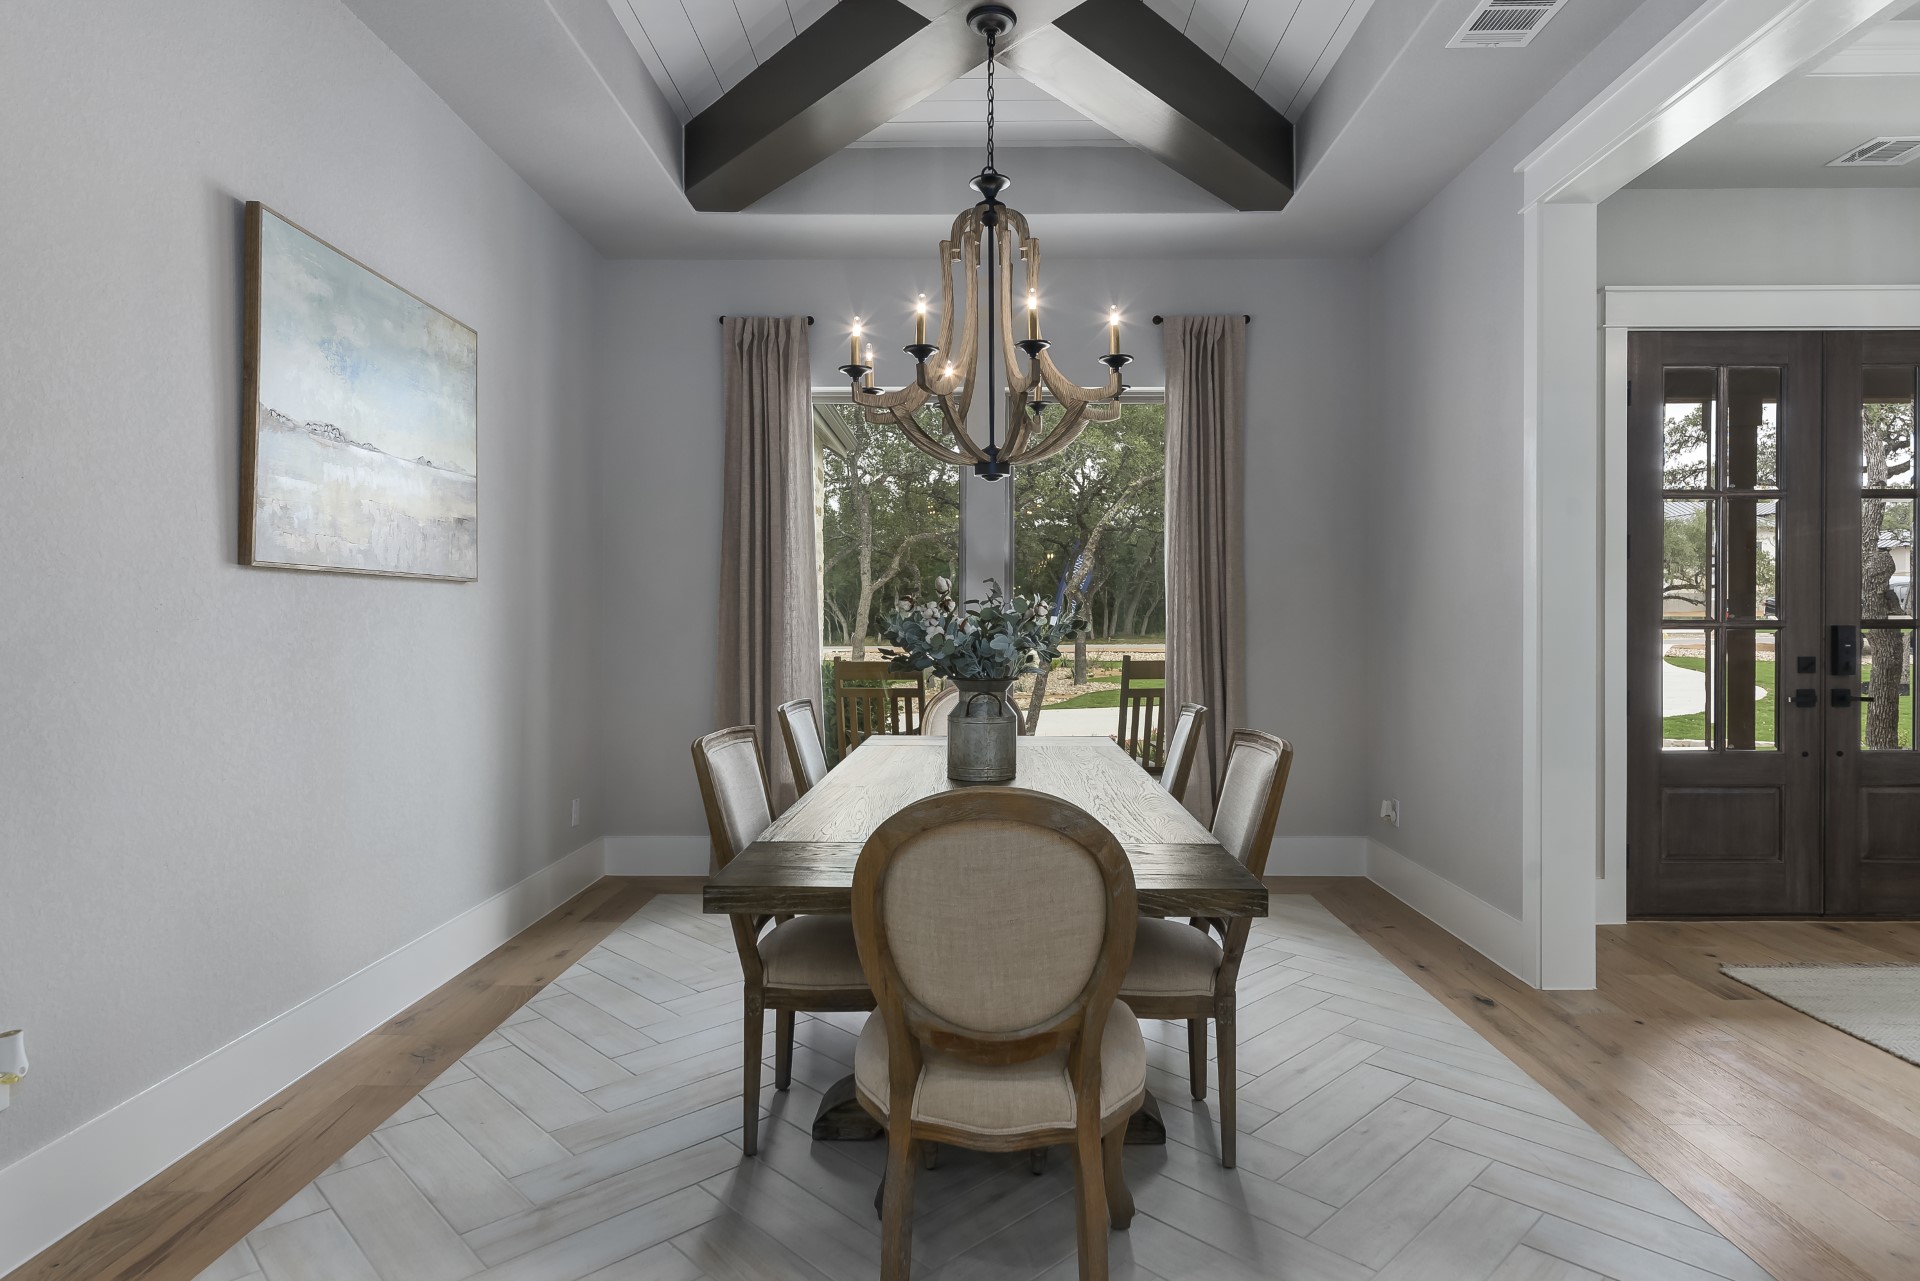 A front view of the dining room within the Belle Oaks custom floor plan from JLP Builders